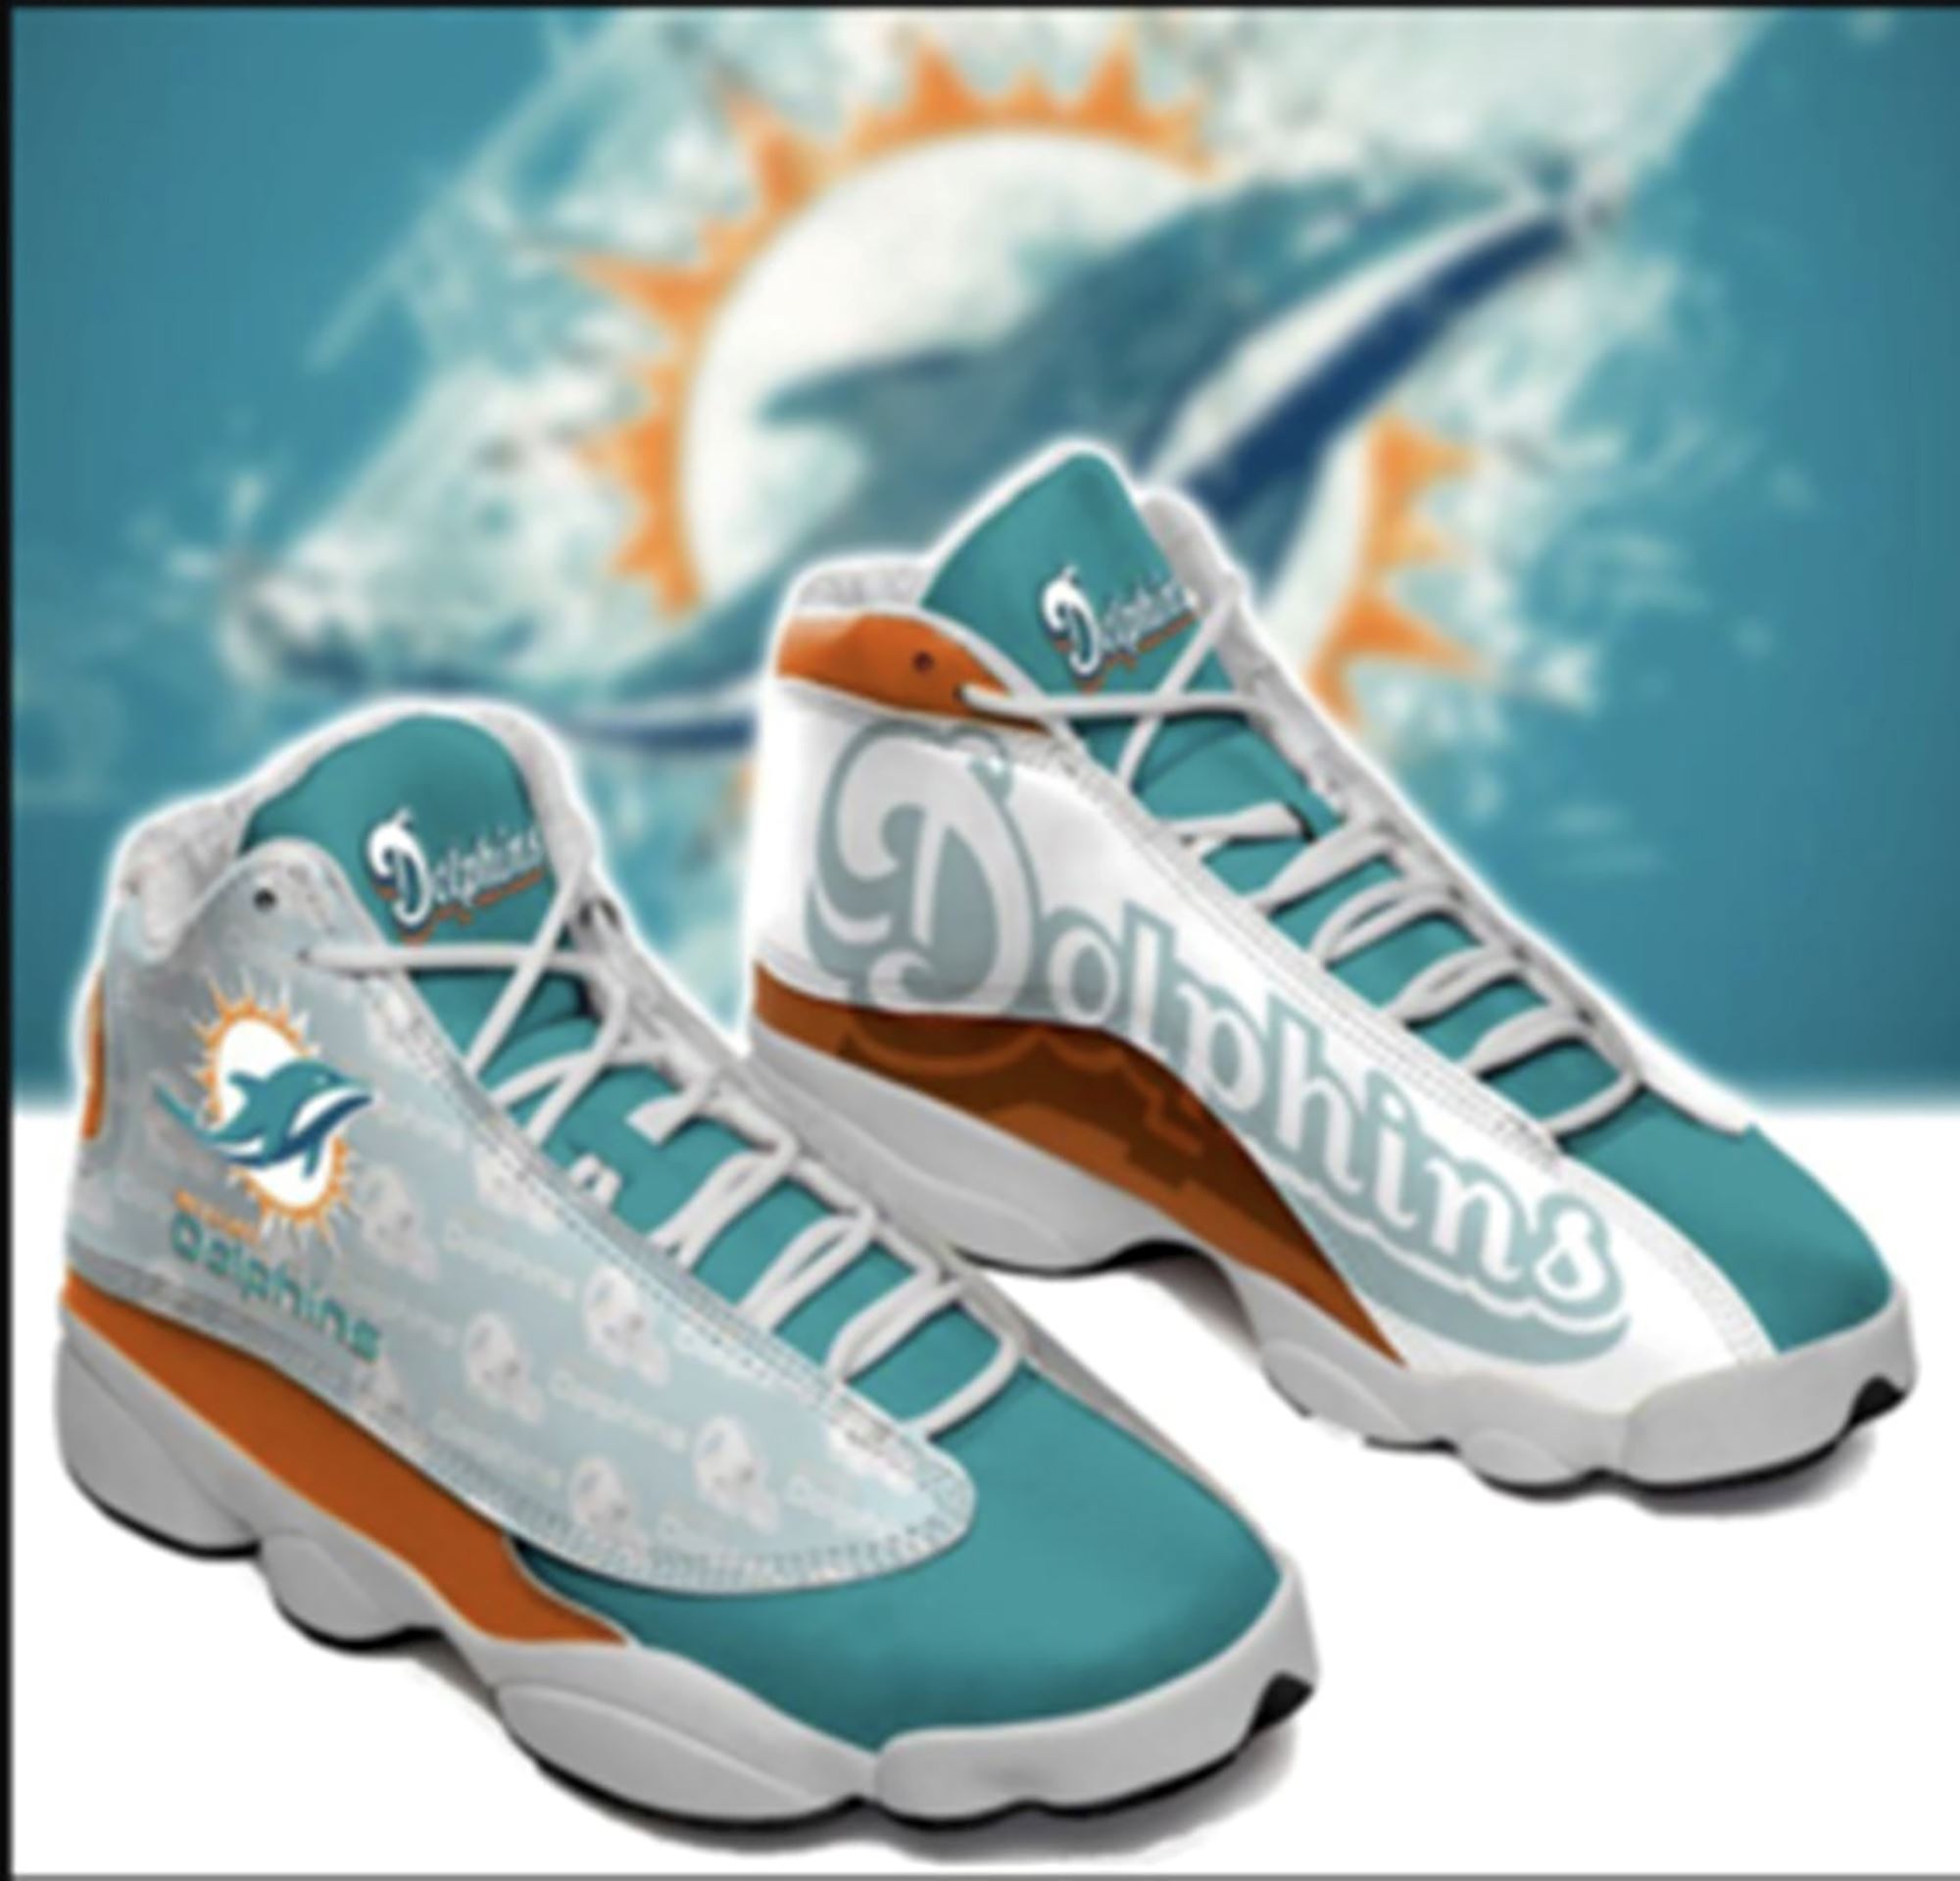 Miami Dolphins Air Jordan 13 Sneakers Sport Shoes Unisex Shoe Gift Birthday Gift For The Fans Gift For Him And Her